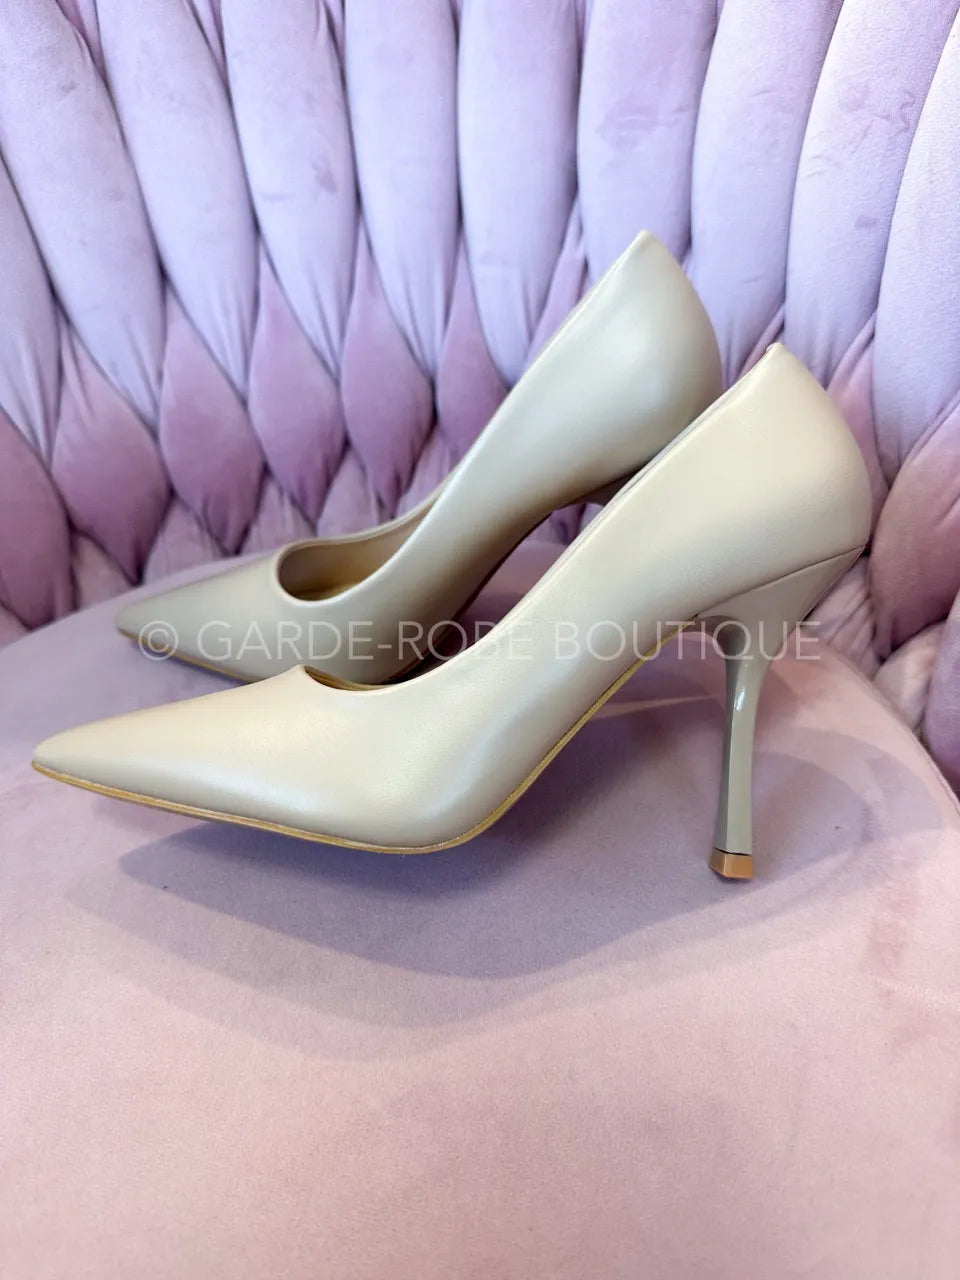 Classic high heels "Pointy nude"